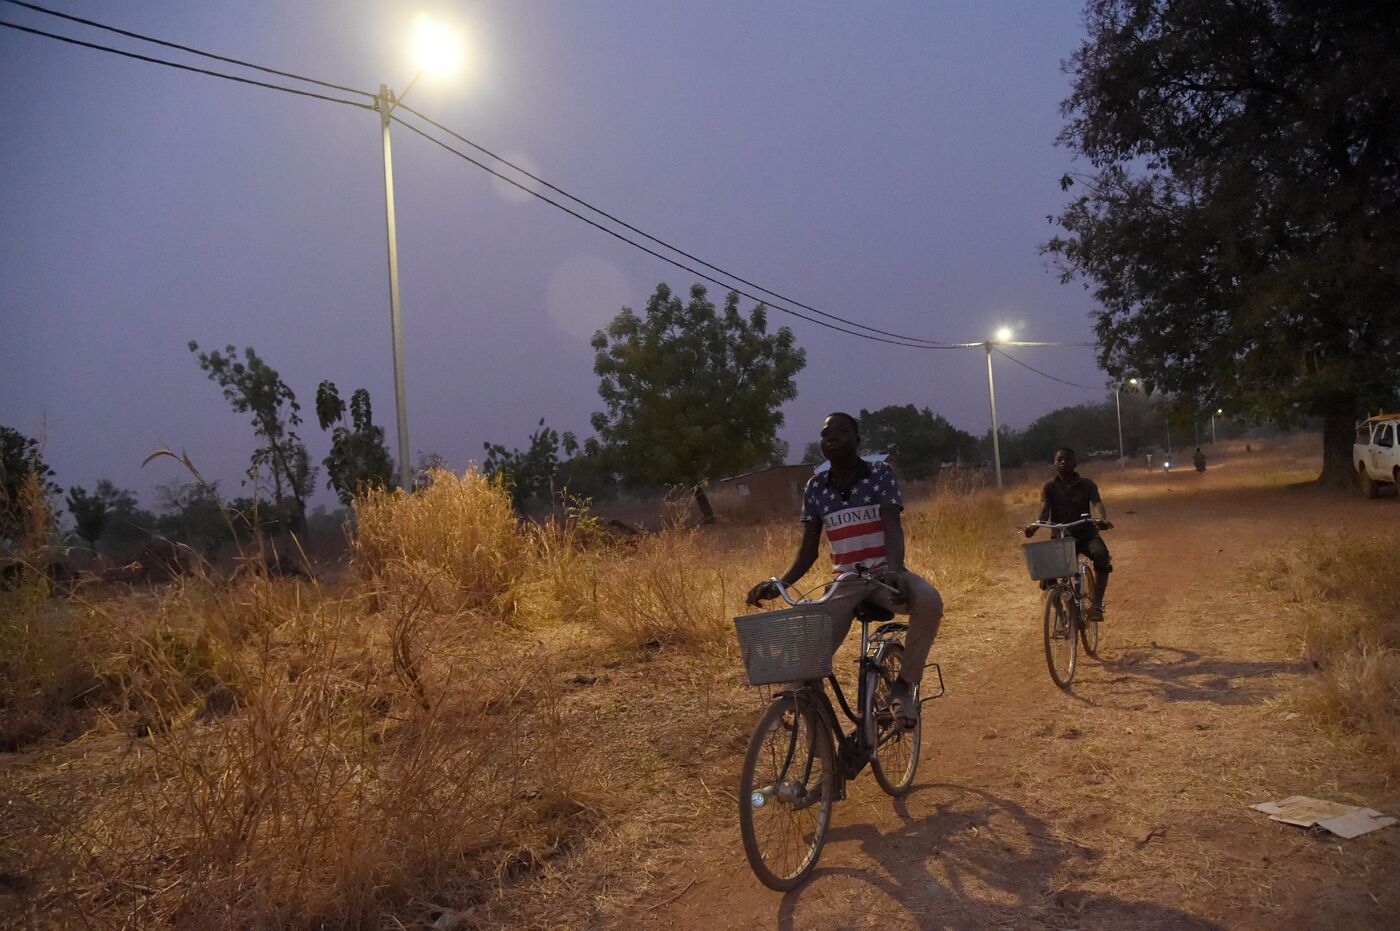 Cyclists ride underneath solar lights in the Takpapieni village in Oti province of northern Togo, Uganda